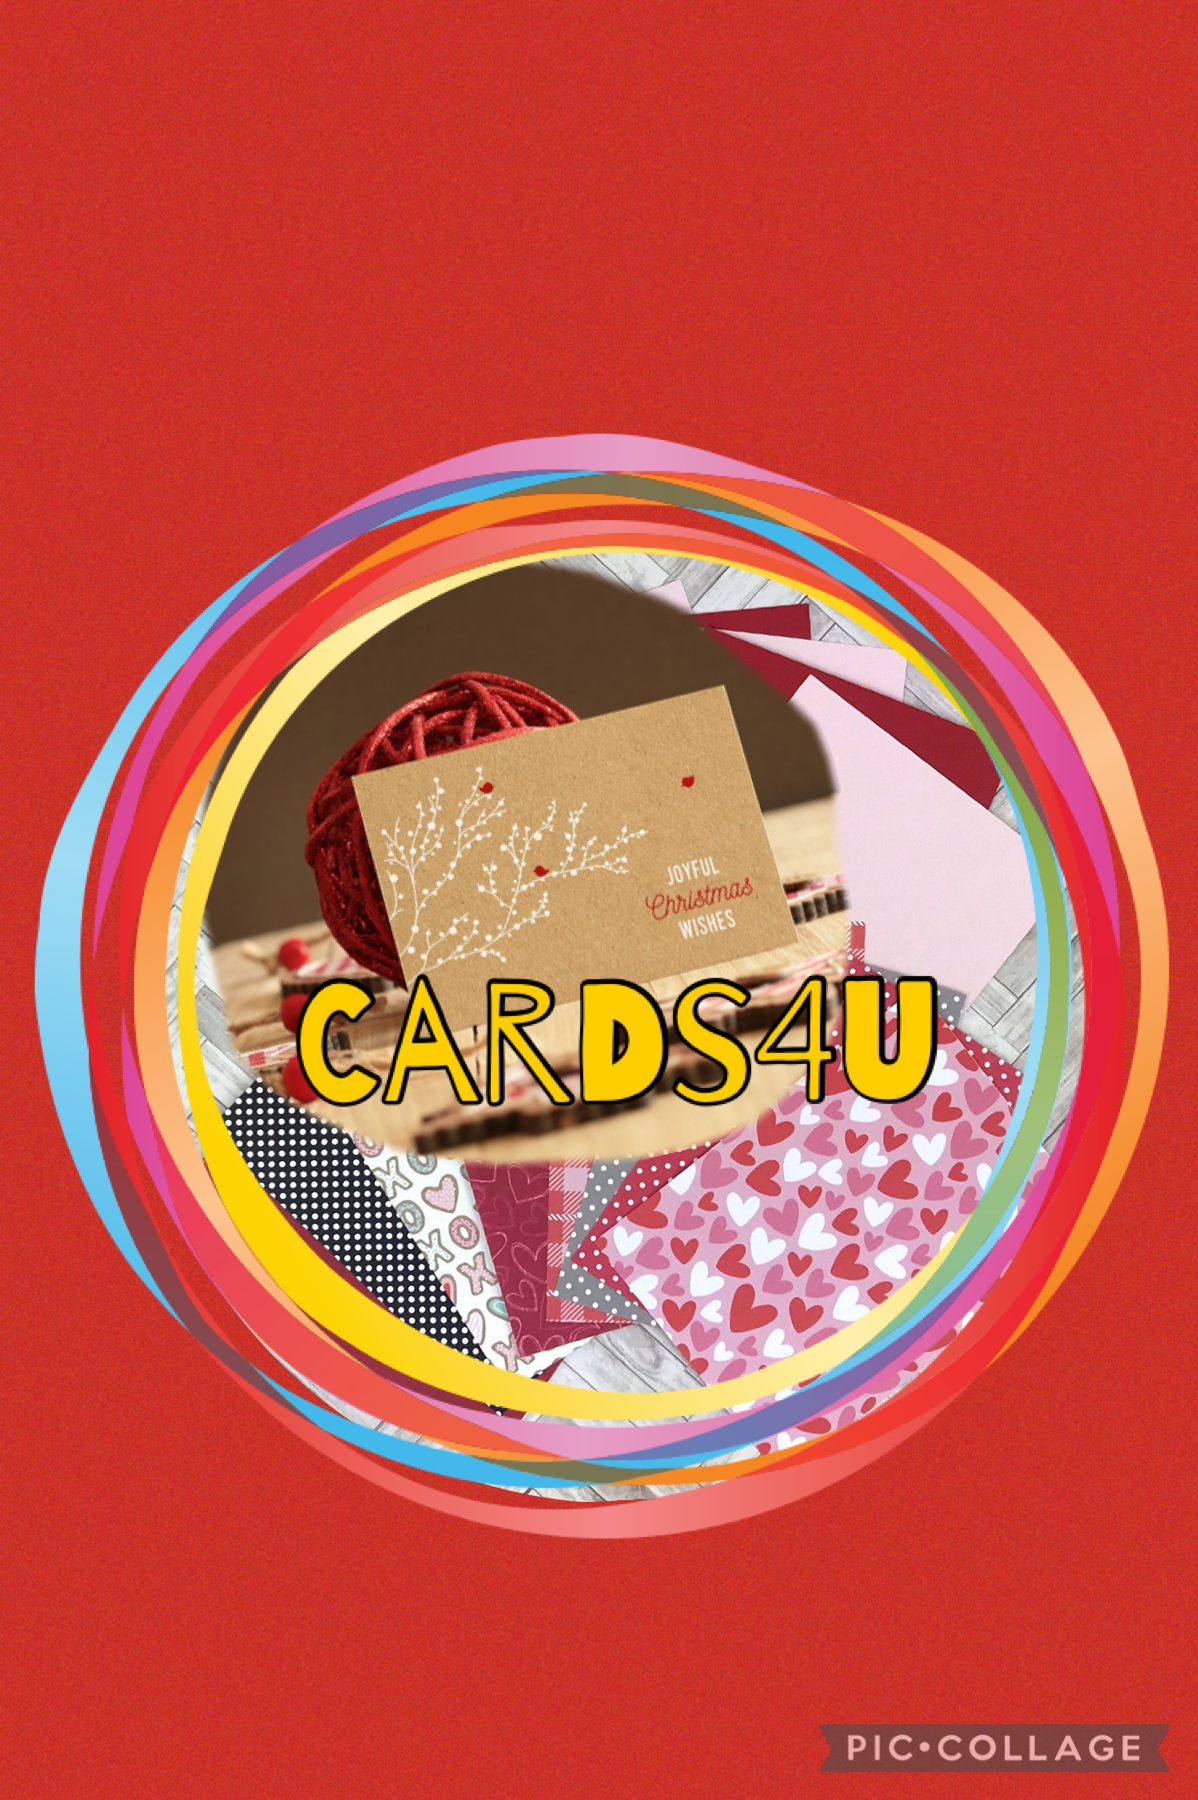 Hope u like it this is for Cards4u for their new account pls go and follow her